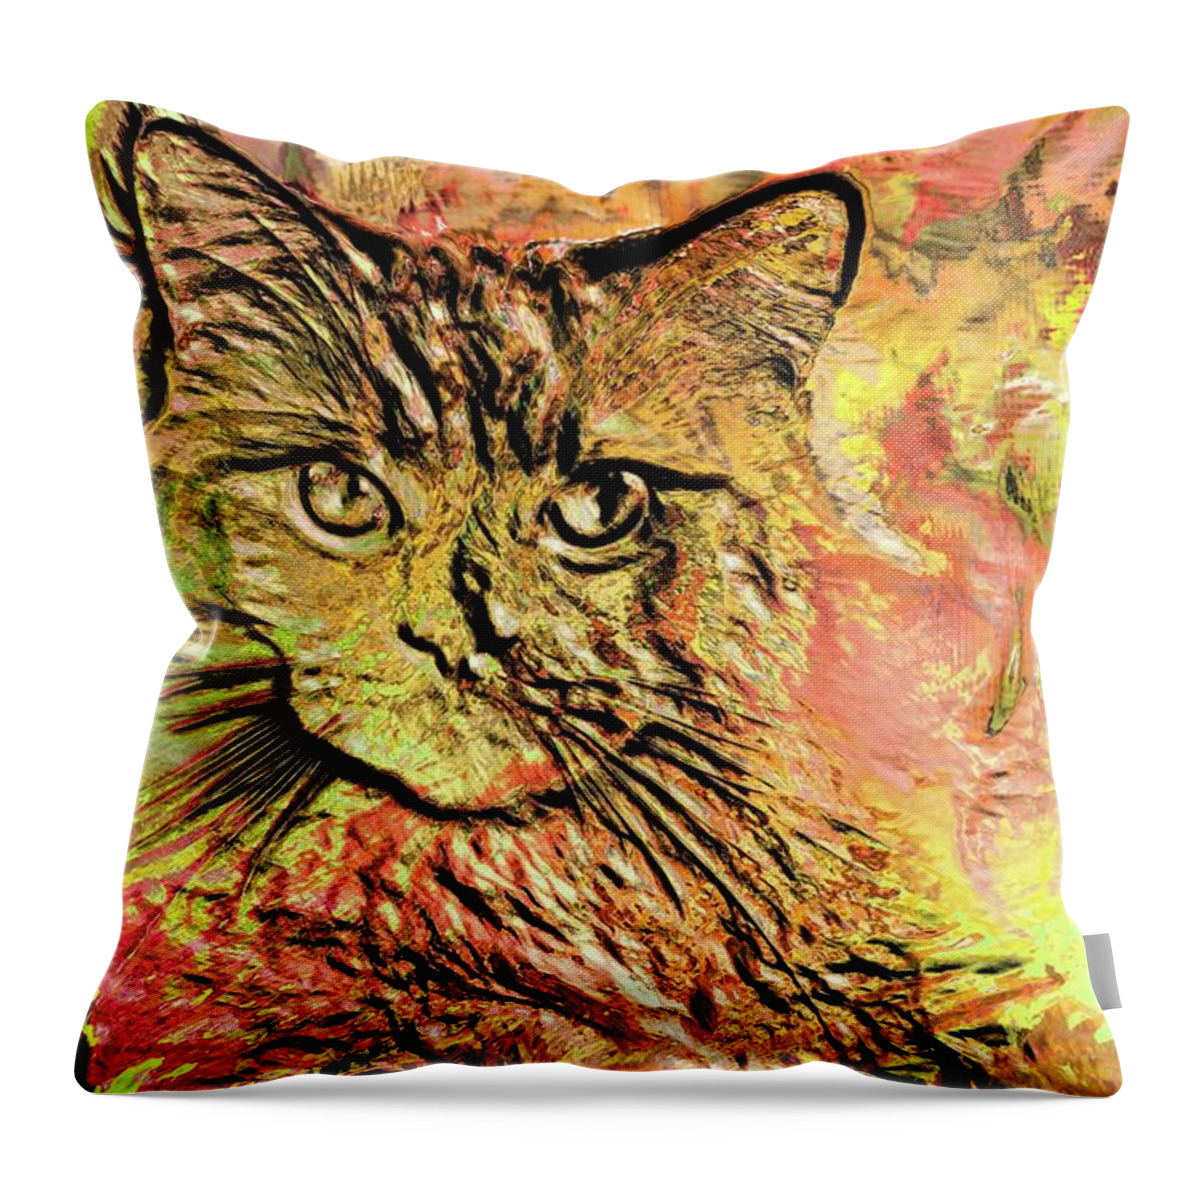 Super Duper Throw Pillow featuring the digital art Super Duper Cat Glass by Don Northup